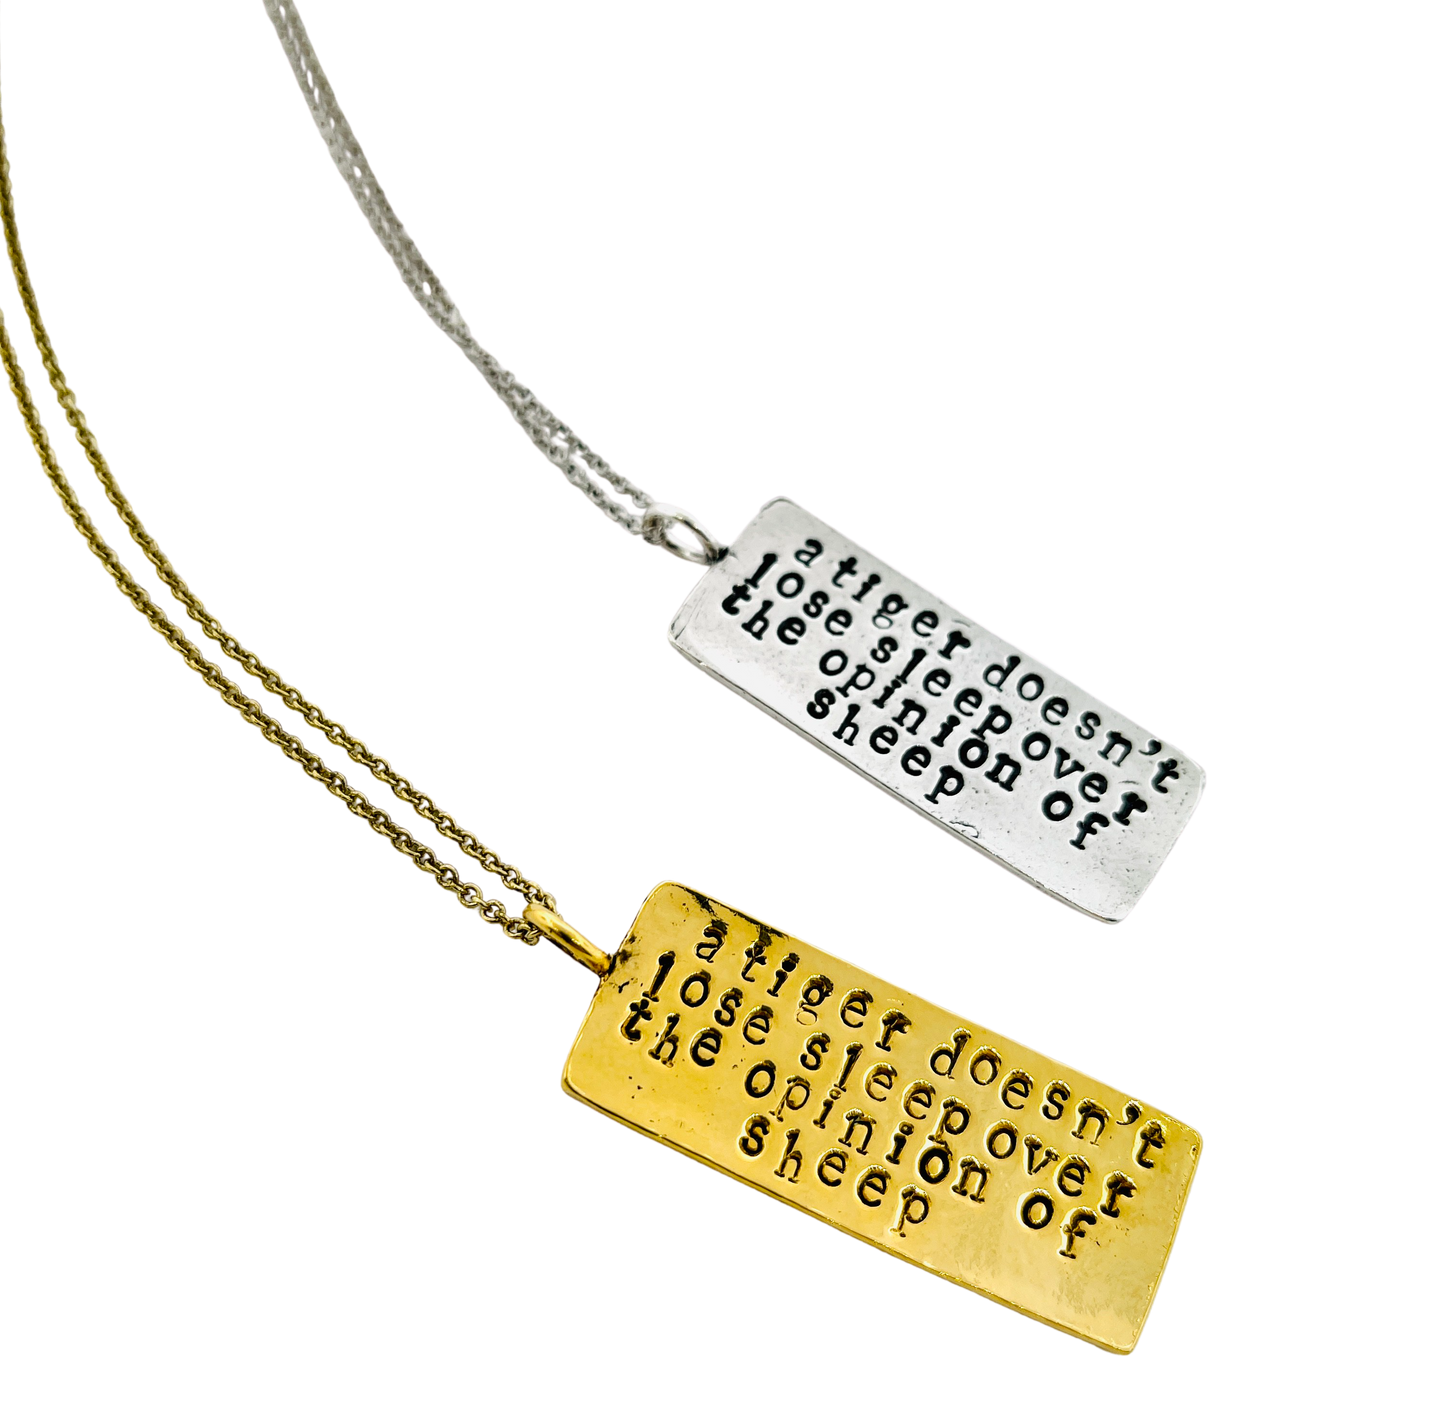 A Tiger Doesn't Lose Sleep Hand Stamped Necklace